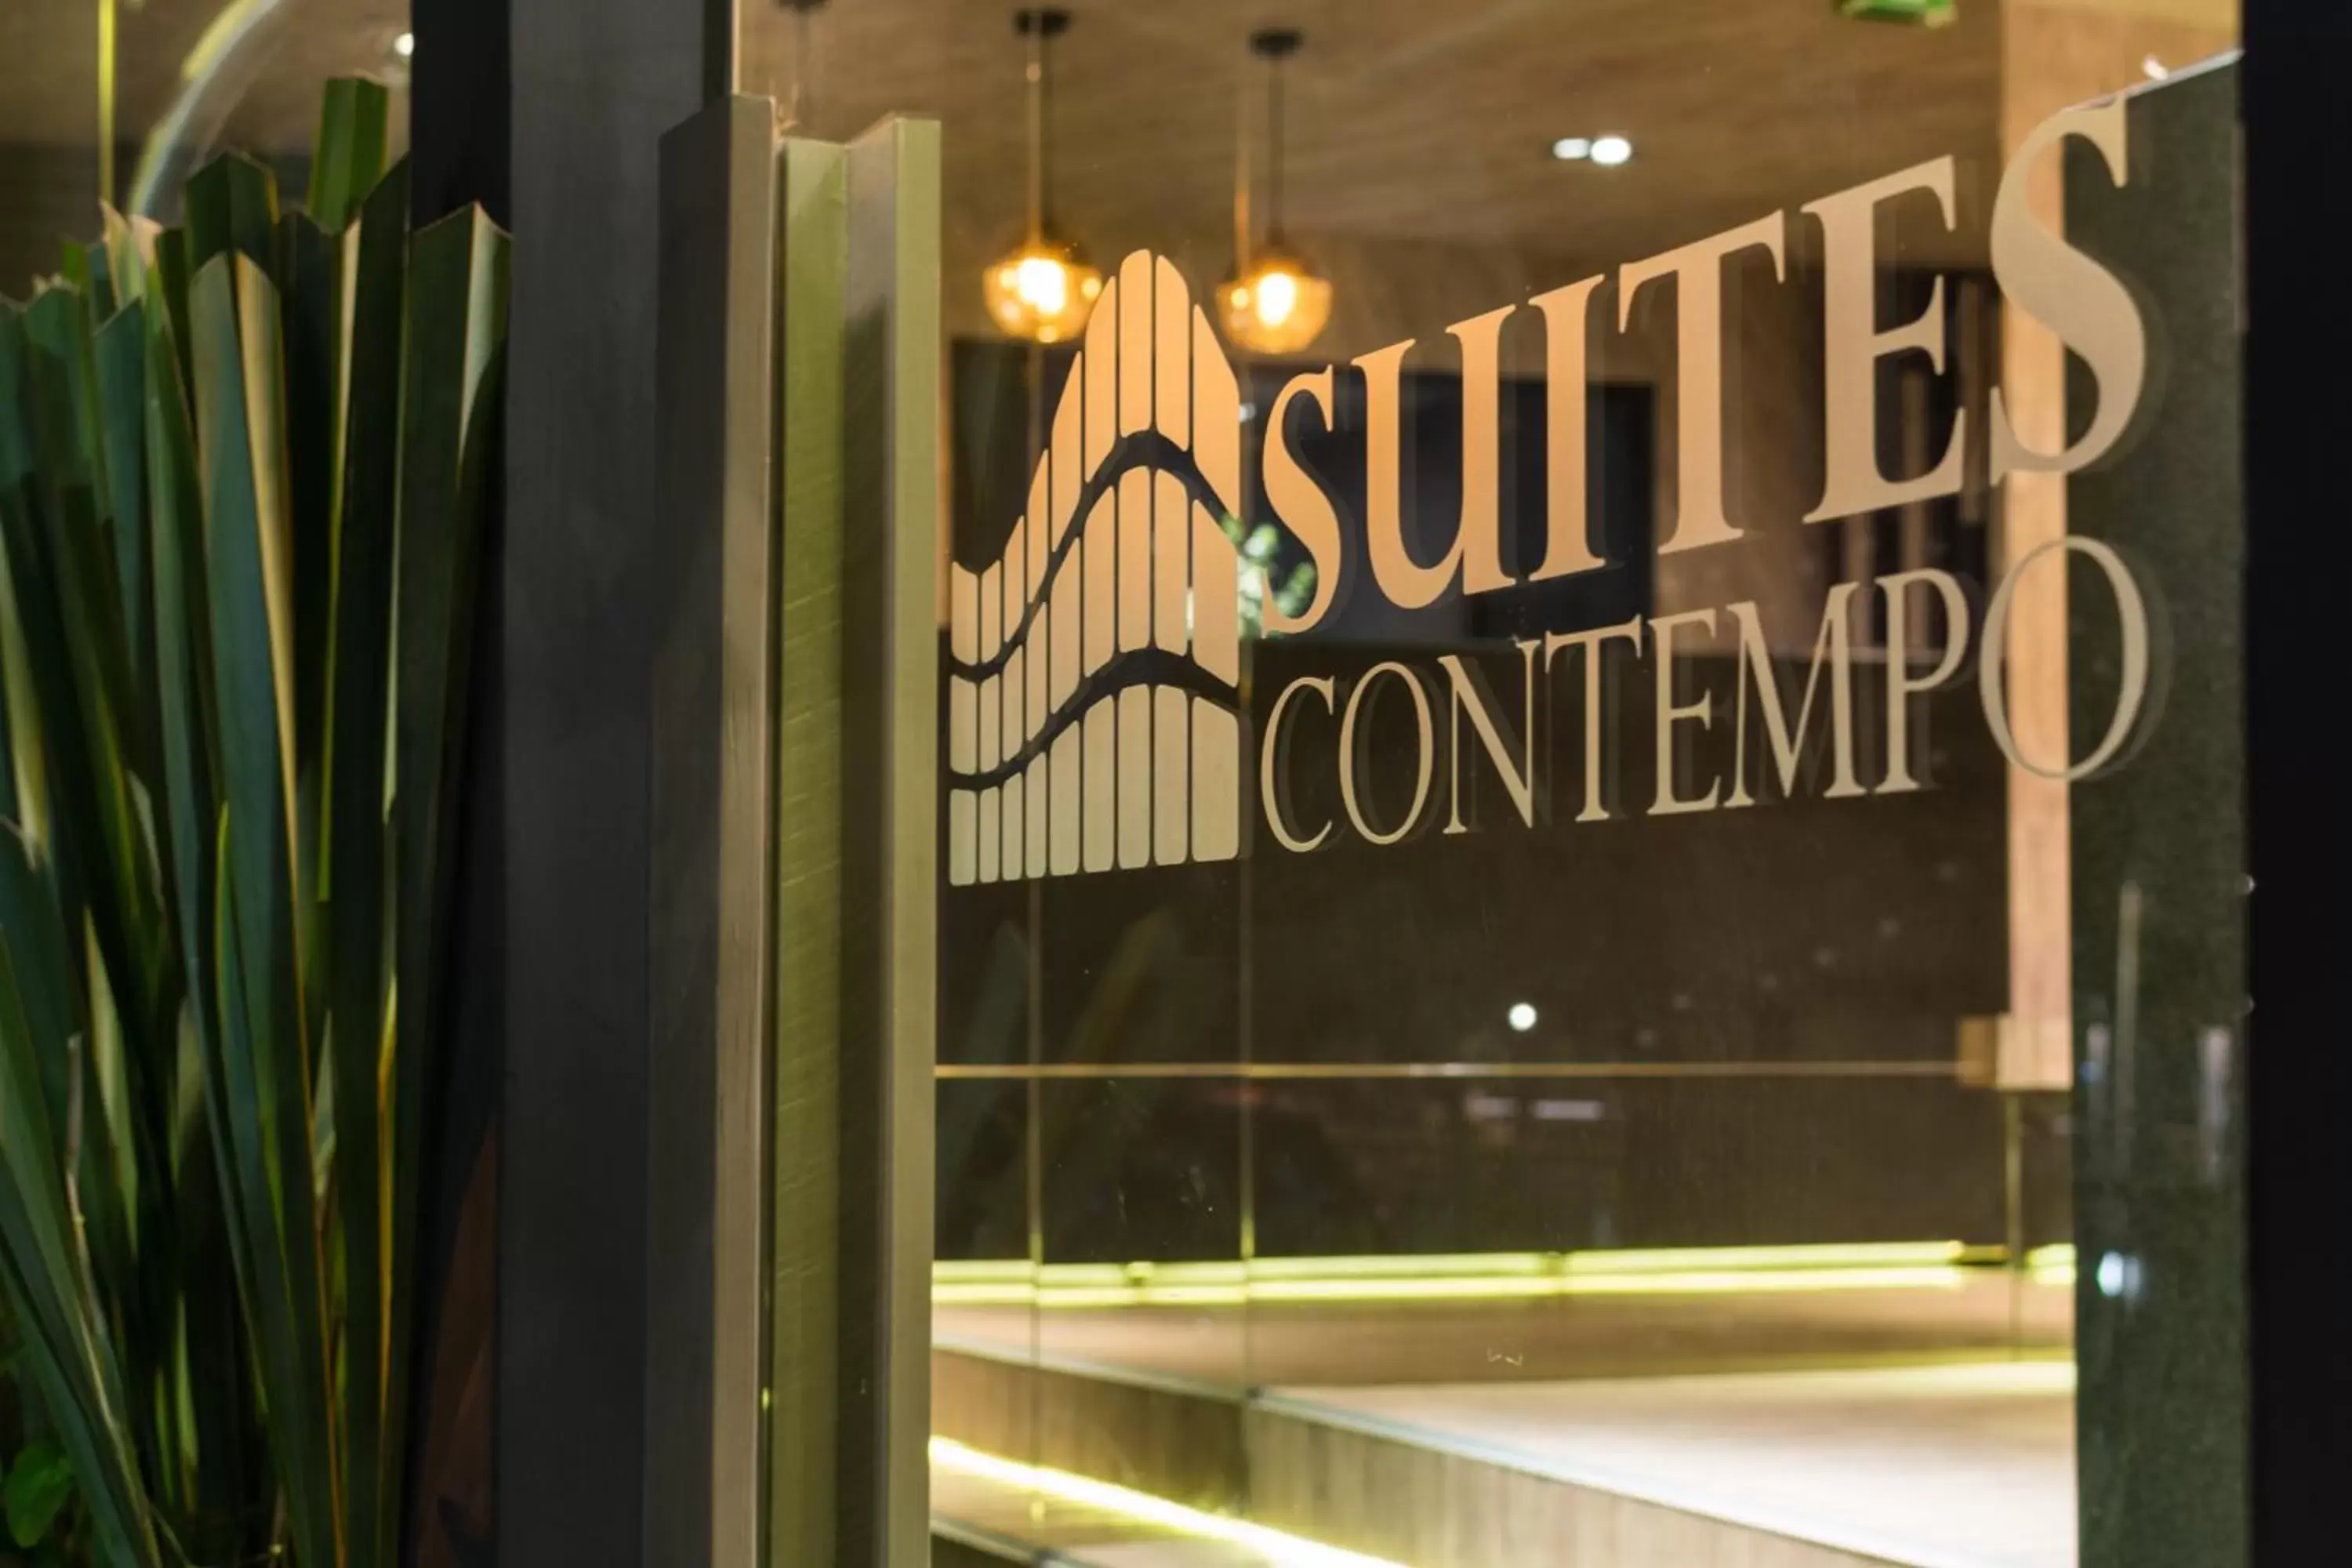 Property logo or sign in Suites Contempo